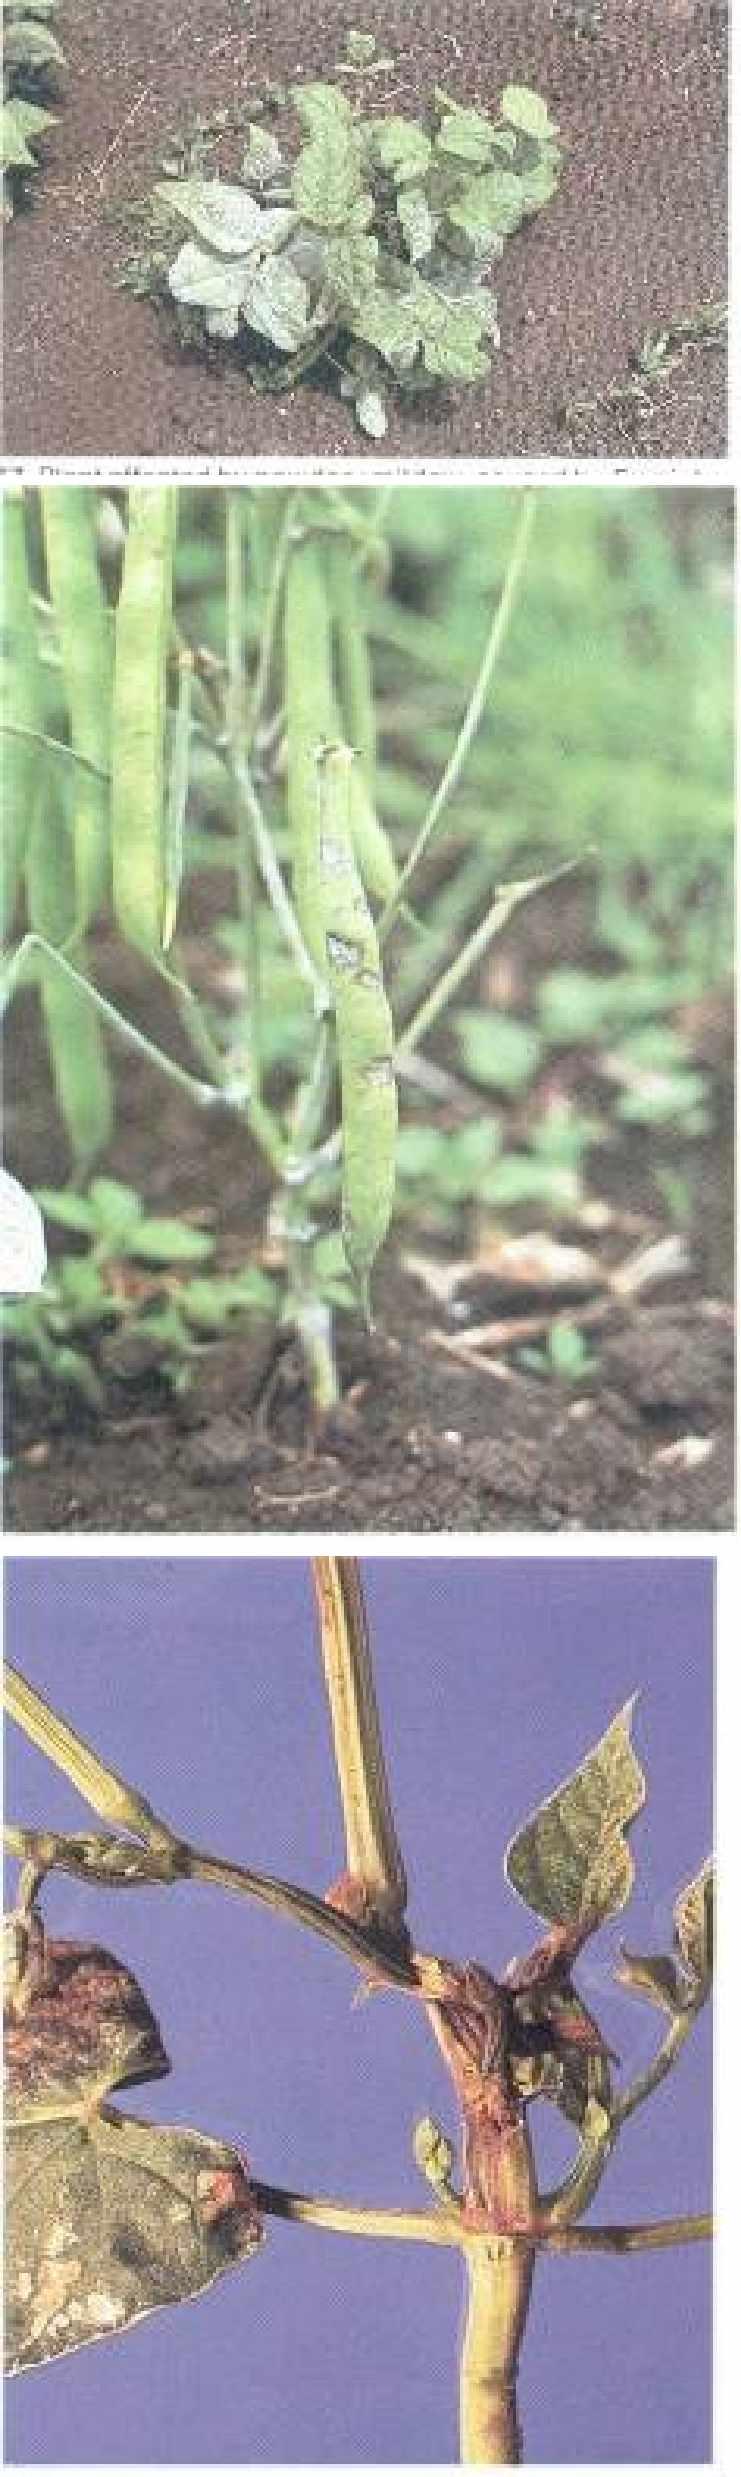 69 Plant affected powdery mildew, caused by Erysiphe polygoni 70 Pods affected by